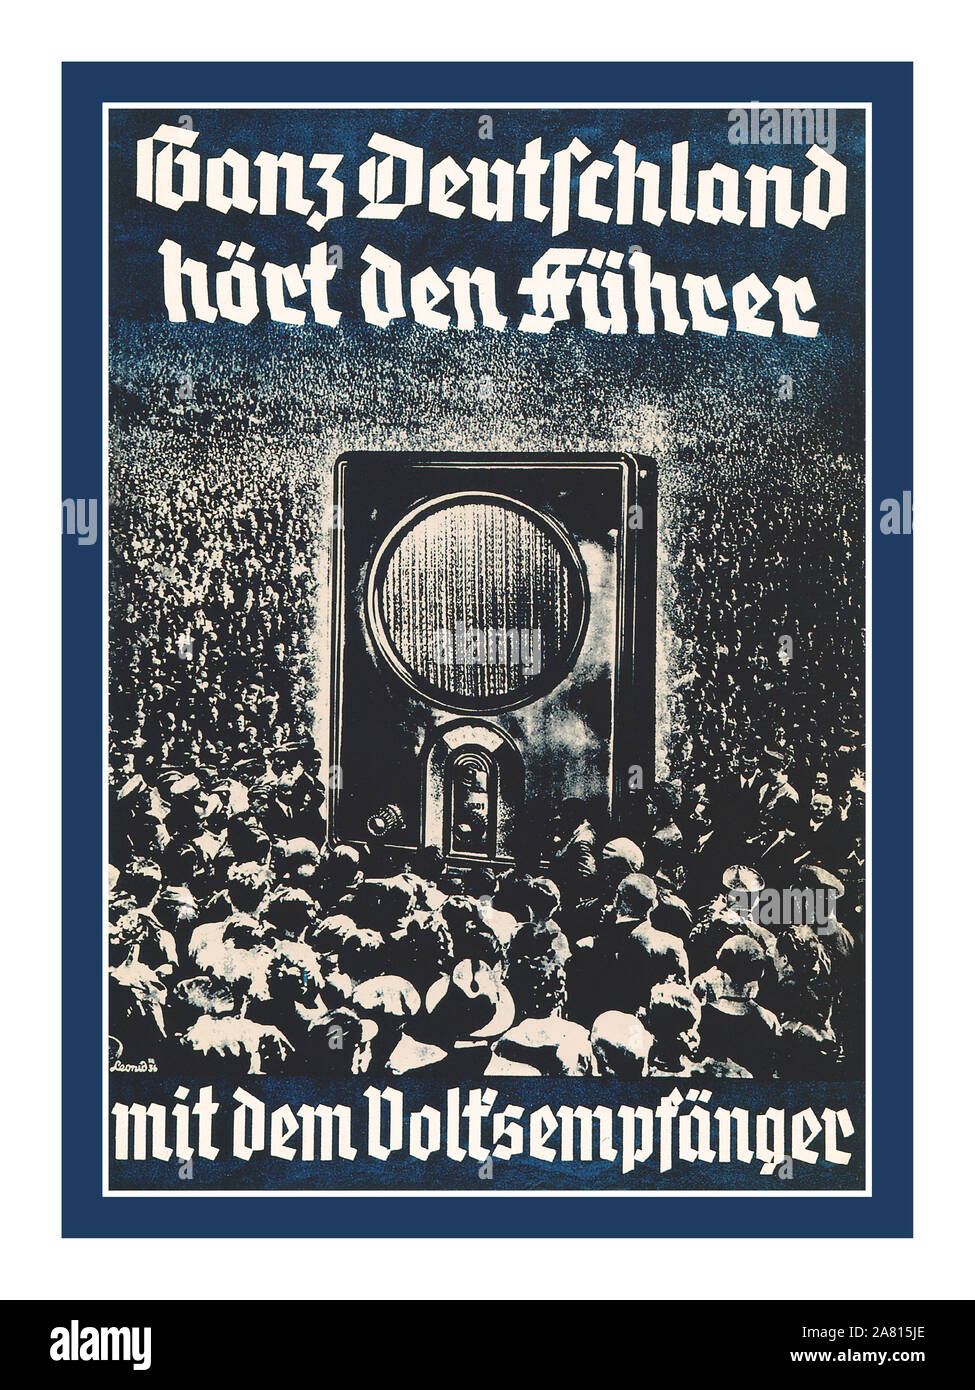 NAZI PEOPLES RADIO 1930’s Vintage Nazi Germany Propaganda Poster pre-WW2 “Ganz Deutschland hört den Führer mit dem Volksempfänger” “….All over Germany hear the Führer with the people's radio receiver” 1936 Nazi Germany poster featuring crowds of Germans at a popular Nuremberg Rally surrounding a larger than life 1930’s “Volksempfänger VE301” radio receiver developed by Propaganda Minister Joseph Goebbels . Stock Photo